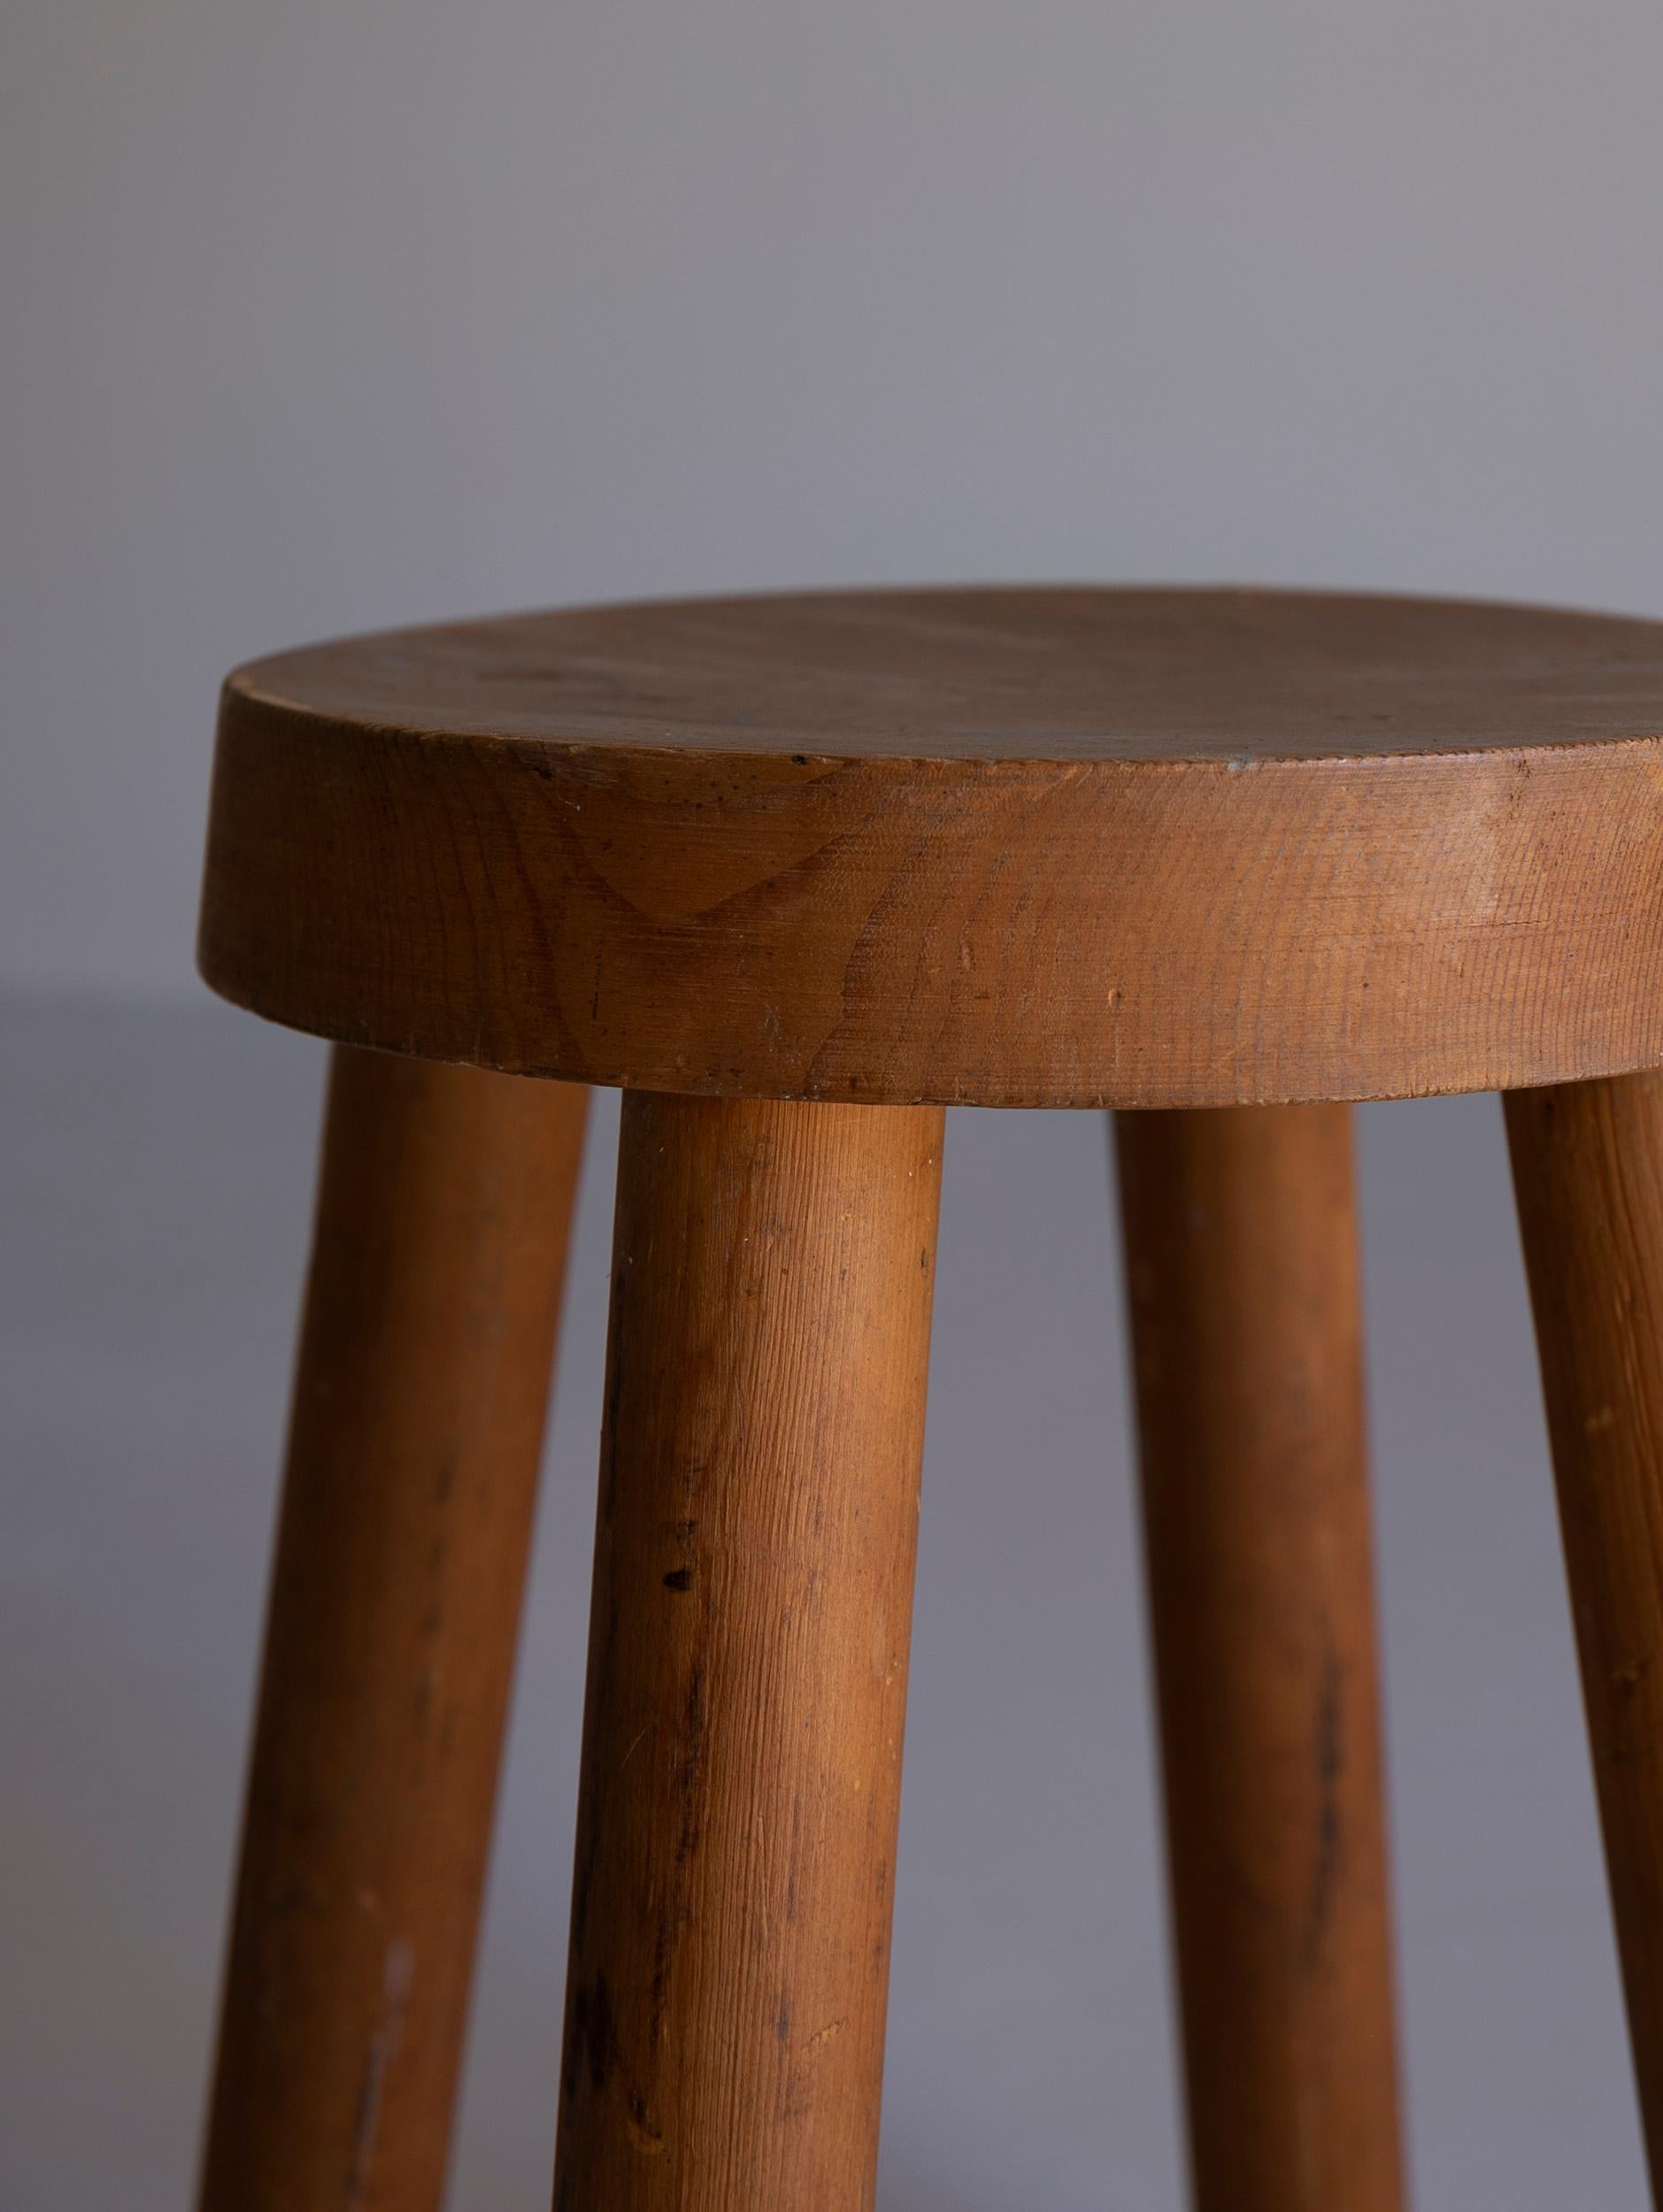 Wood Stool for Méribel Ski Resort by Charlotte Perriand 2